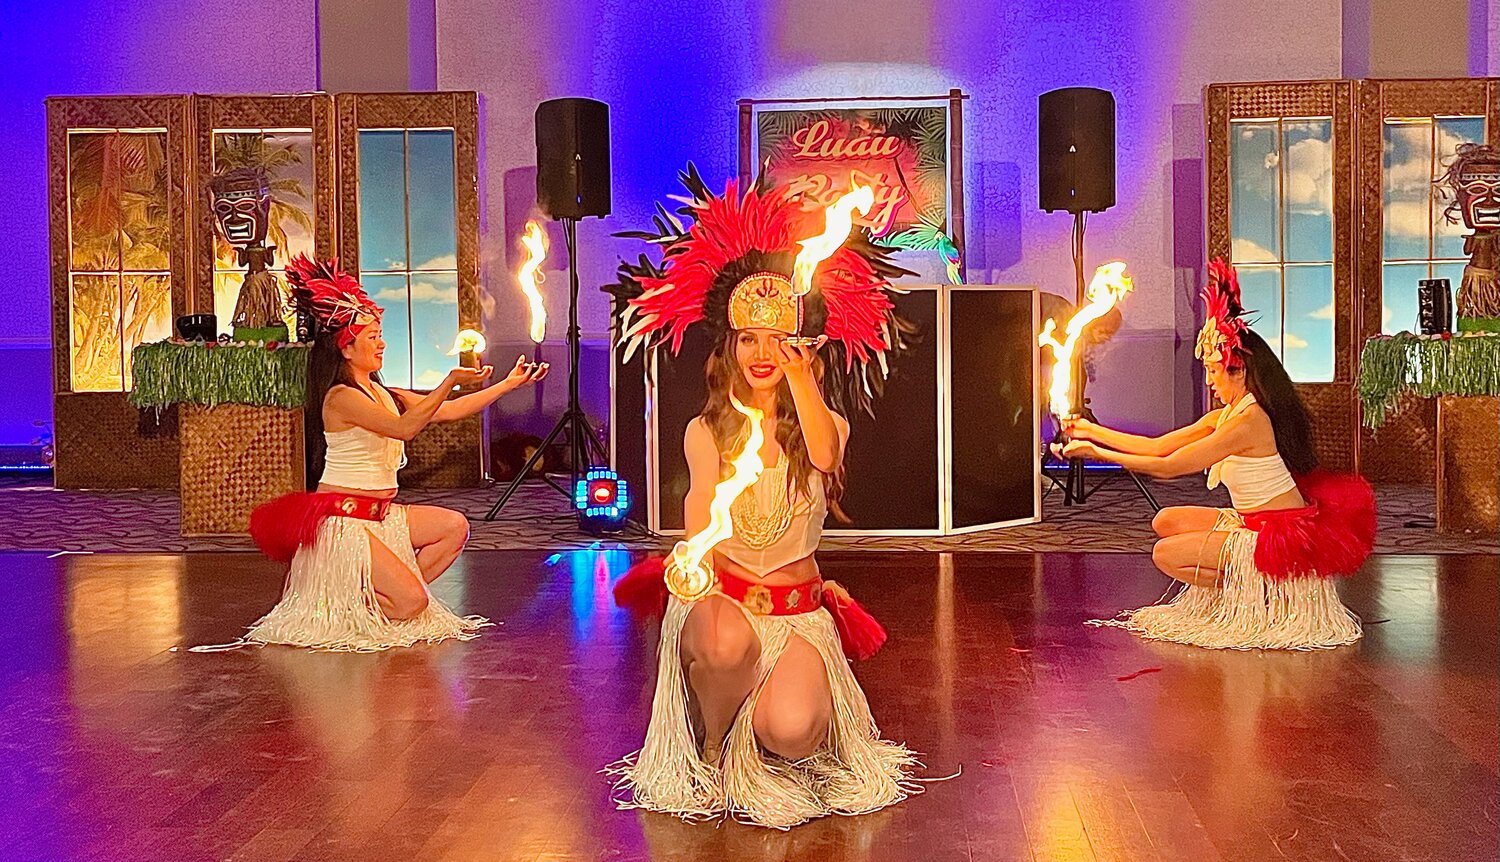 I was looking forward to seeing the floor show, having never been to an actual luau, and was not disappointed as the décor and entertainment were provided by Perry Gips and his team from Party Master.